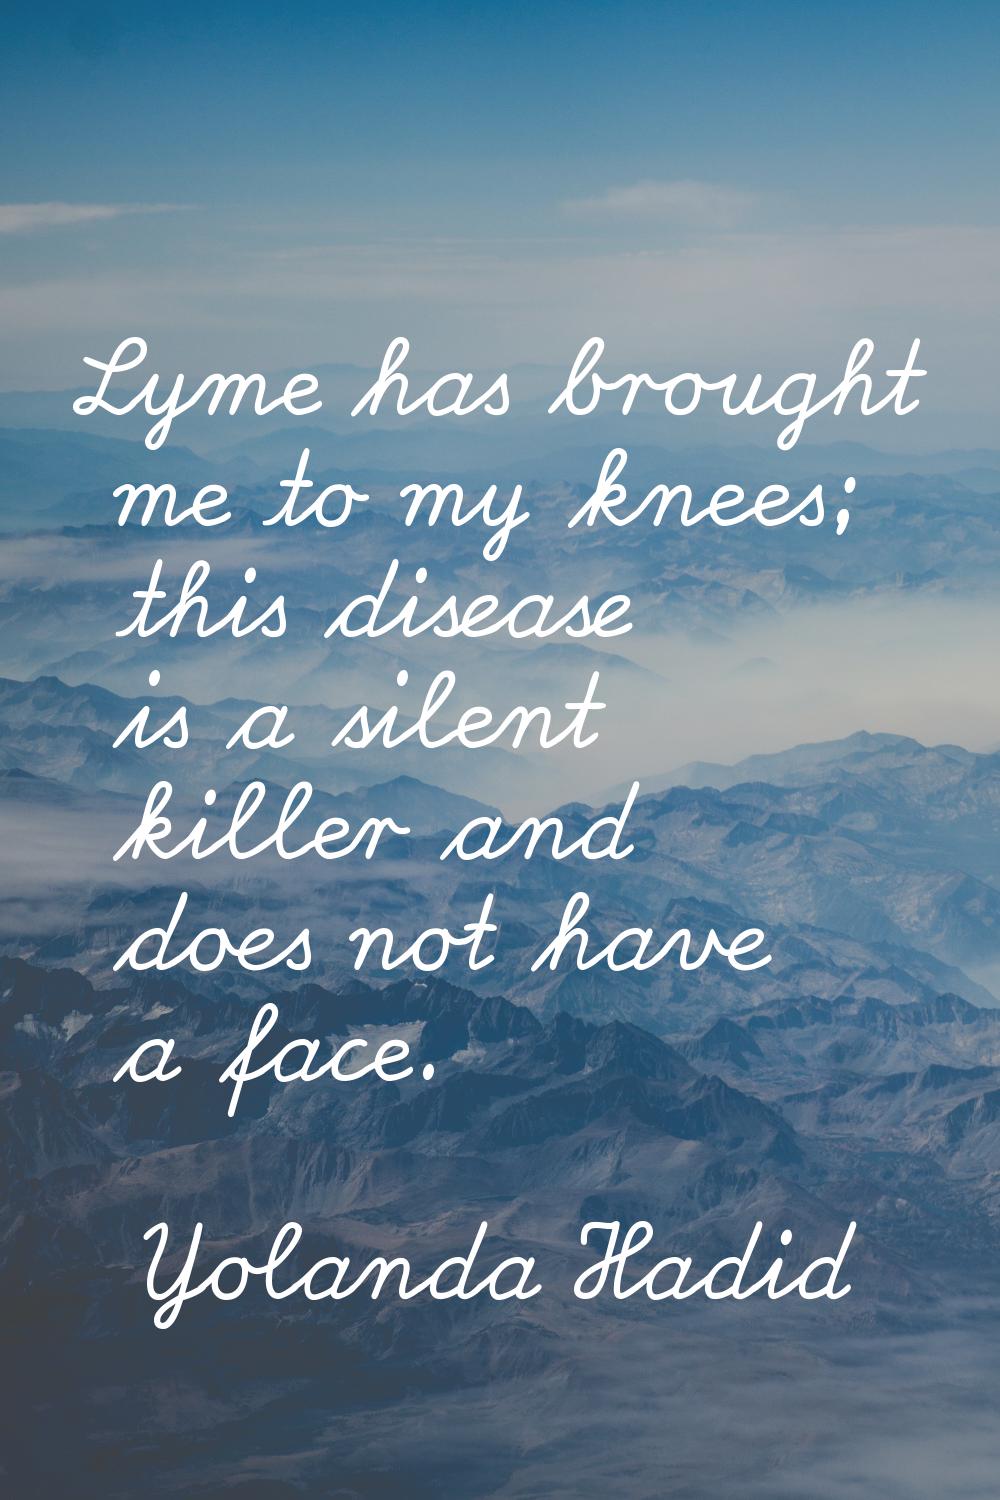 Lyme has brought me to my knees; this disease is a silent killer and does not have a face.